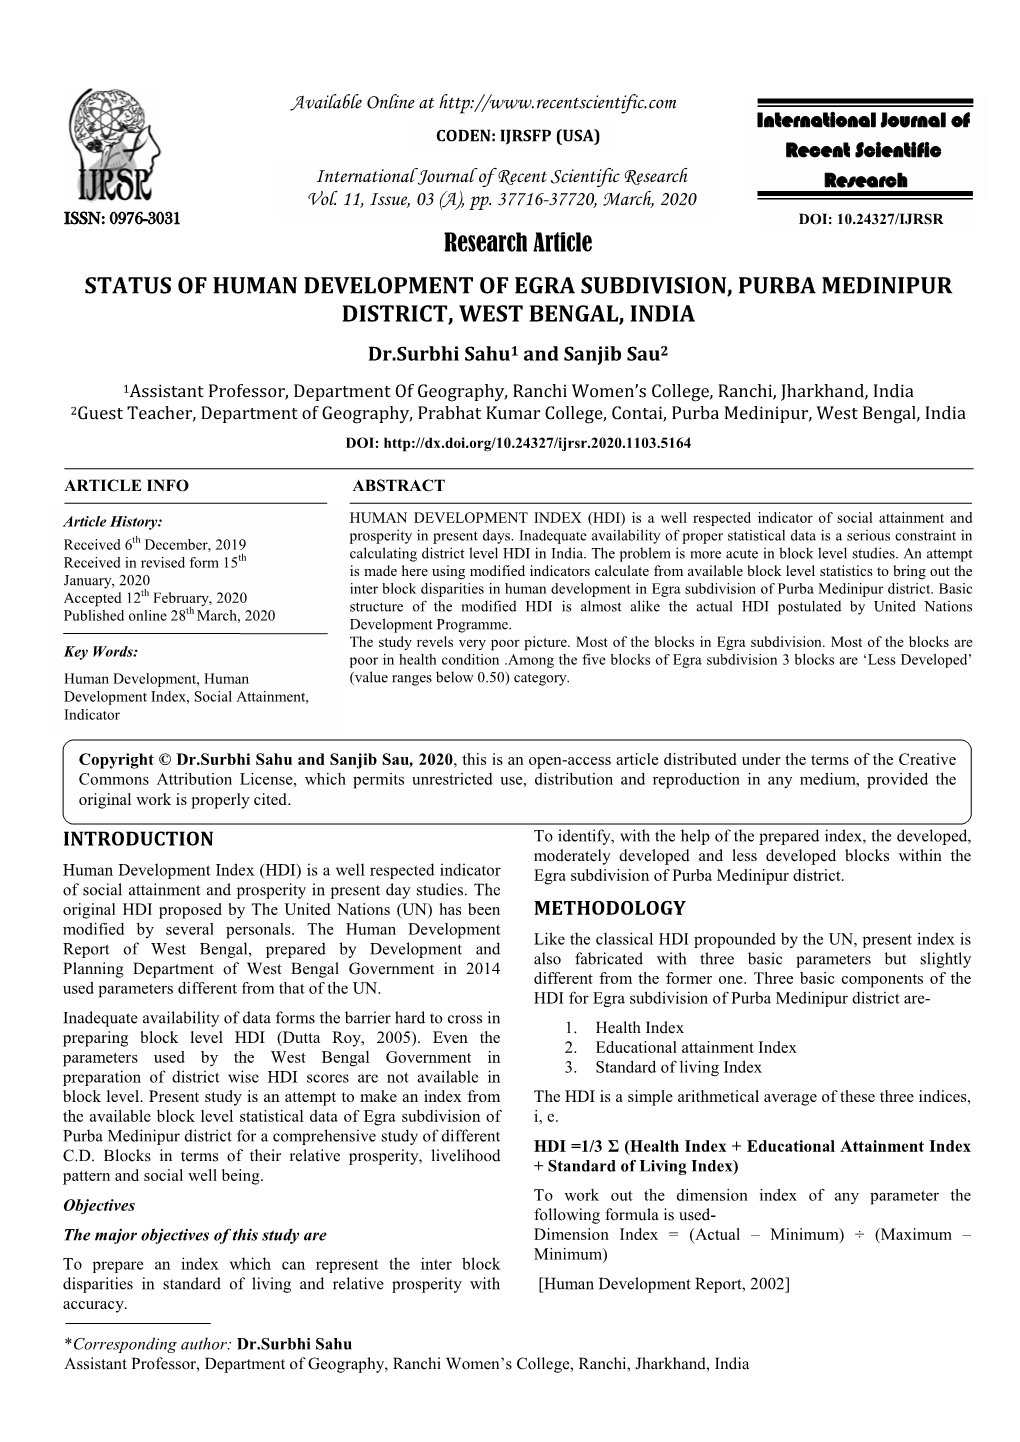 Research Article STATUS of HUMAN DEVELOPMENT of EGRA SUBDIVISION, PURBA MEDINIPUR DISTRICT, WEST BENGAL, INDIA